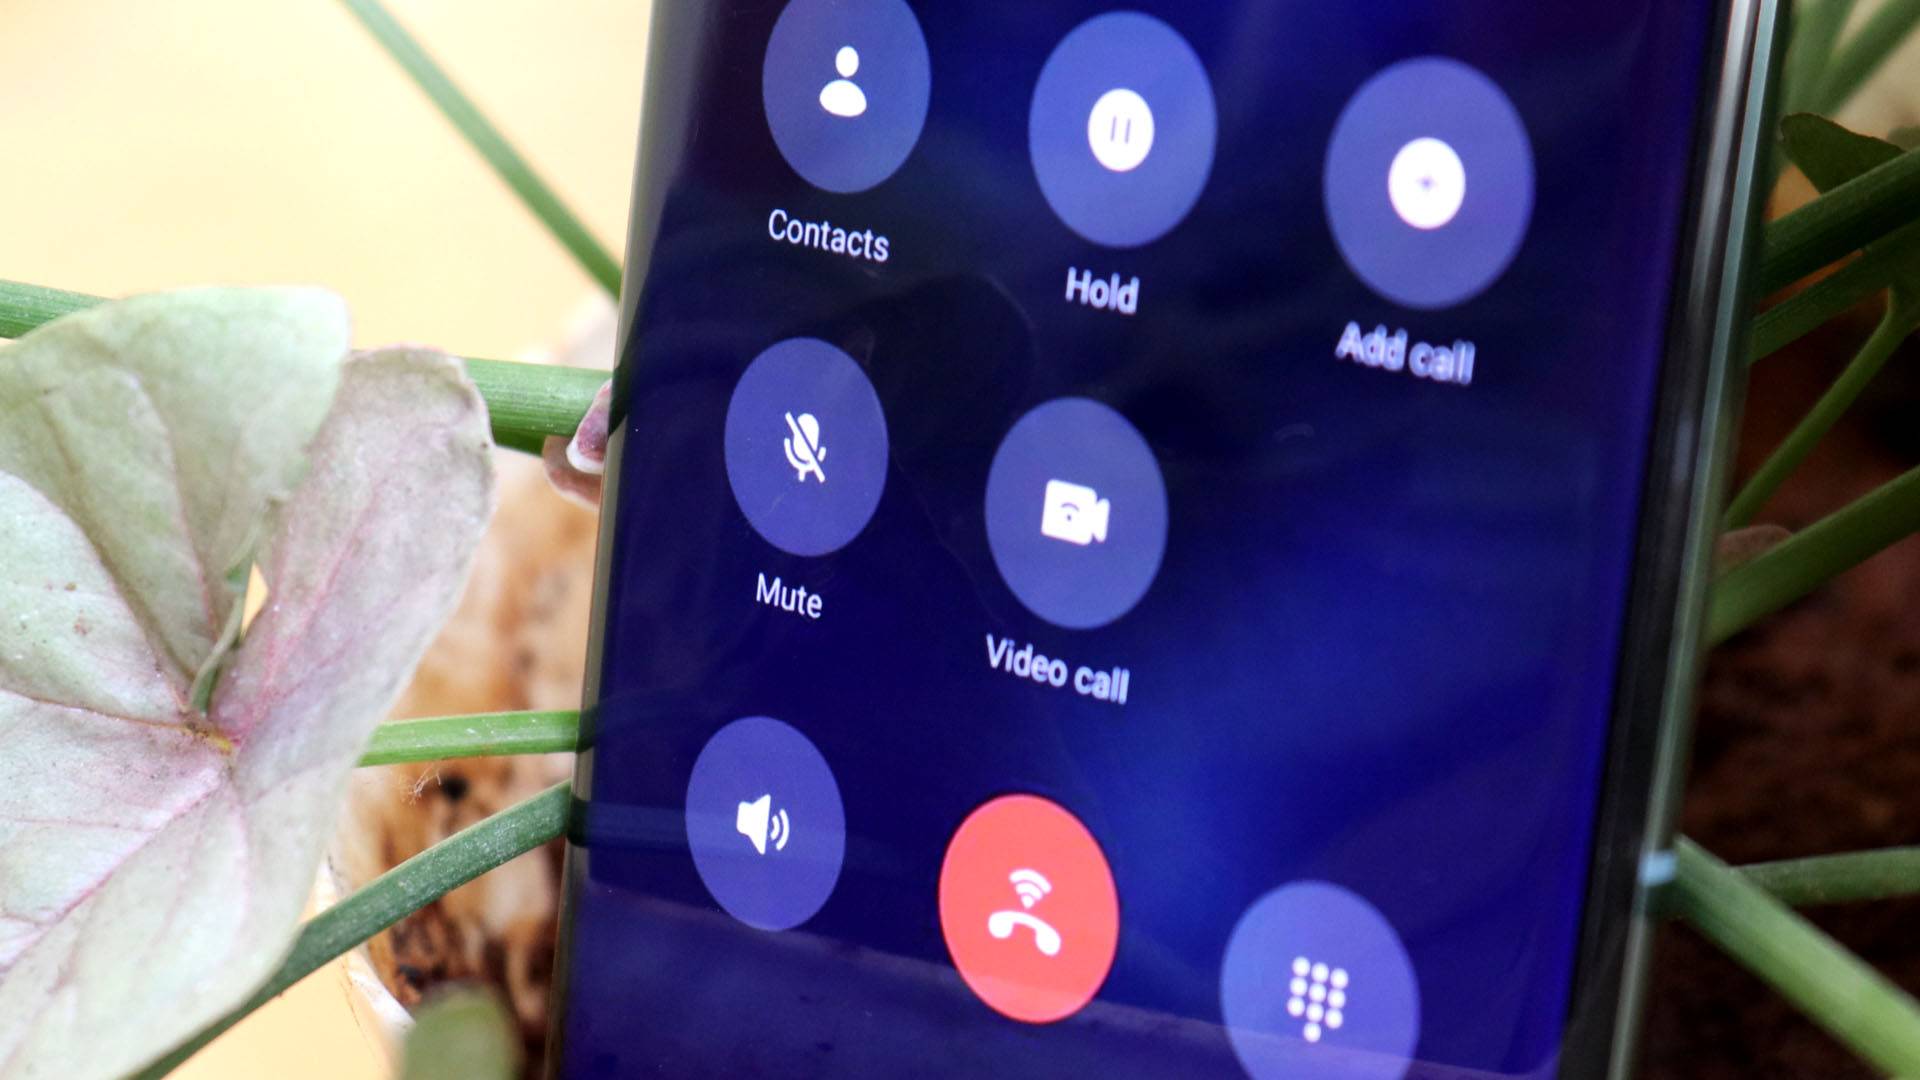 New Oneplus Stock Dialer app for Oneplus Smartphones – Download Now (Video Included)